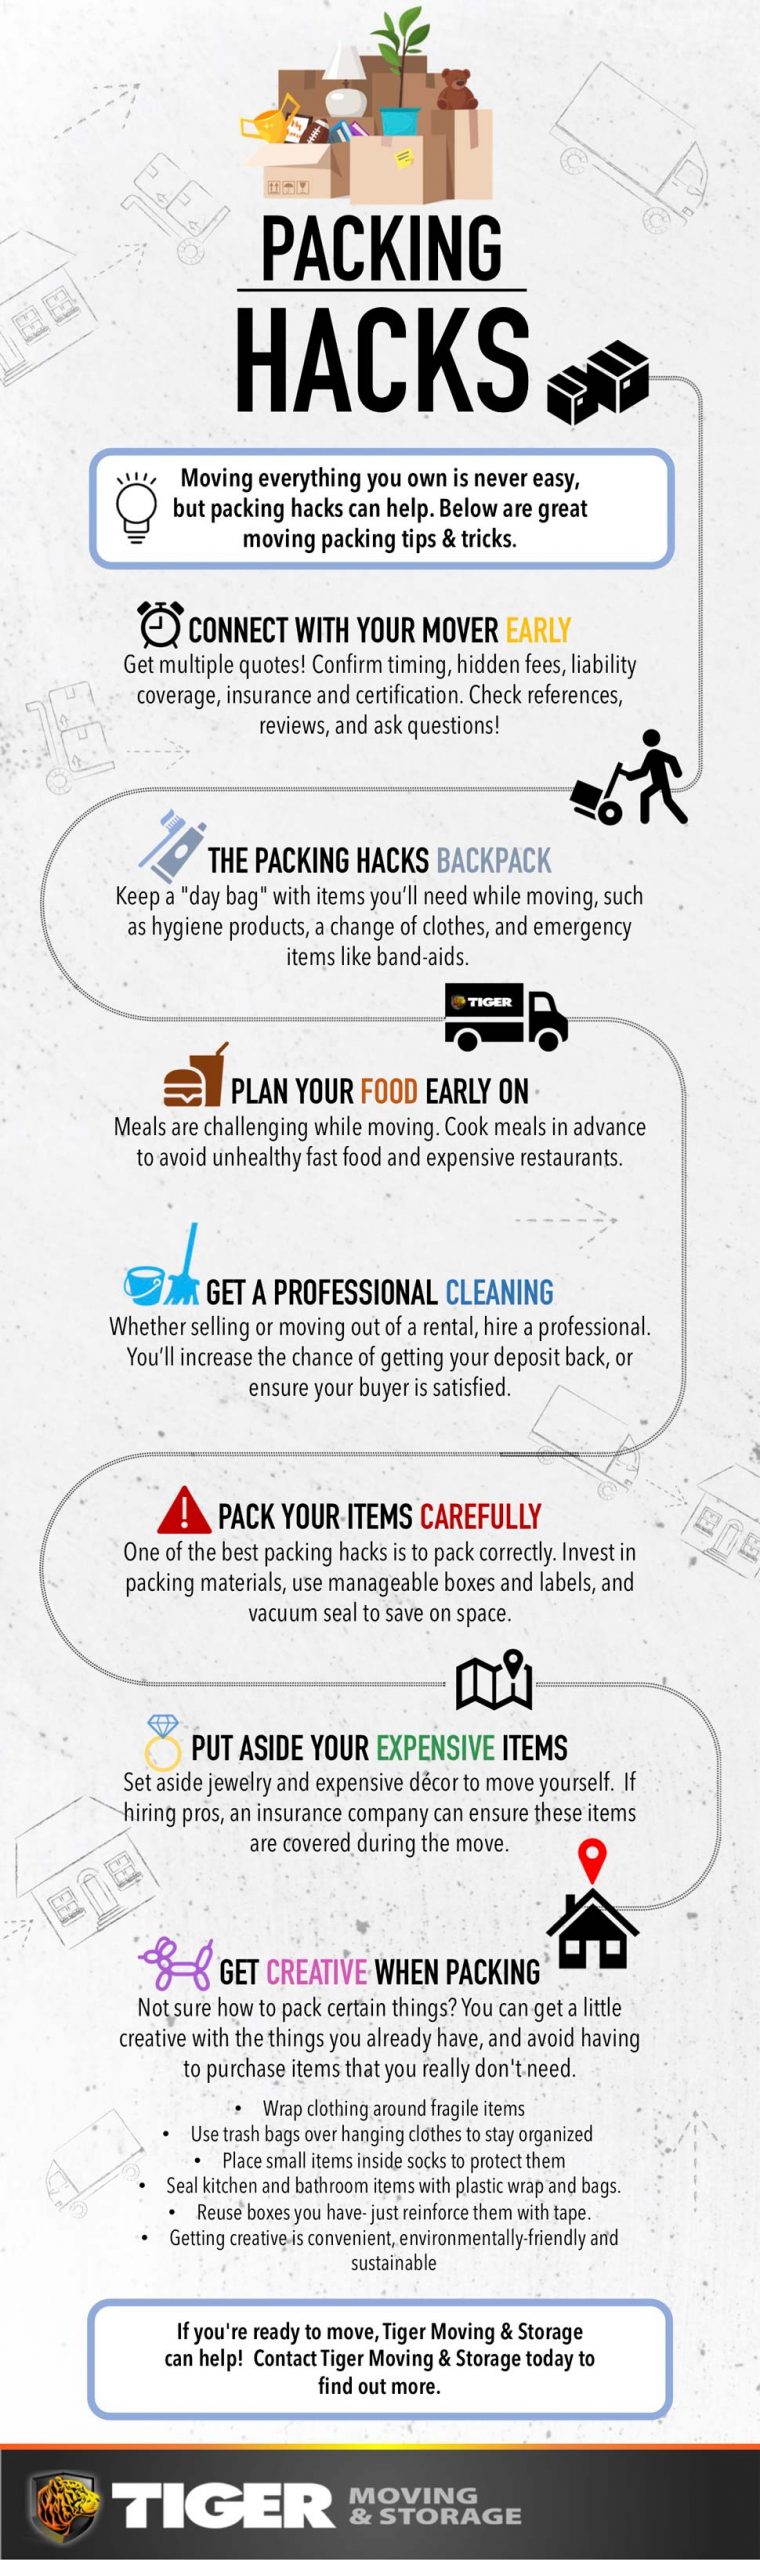 Packing Hacks Infographic Scaled